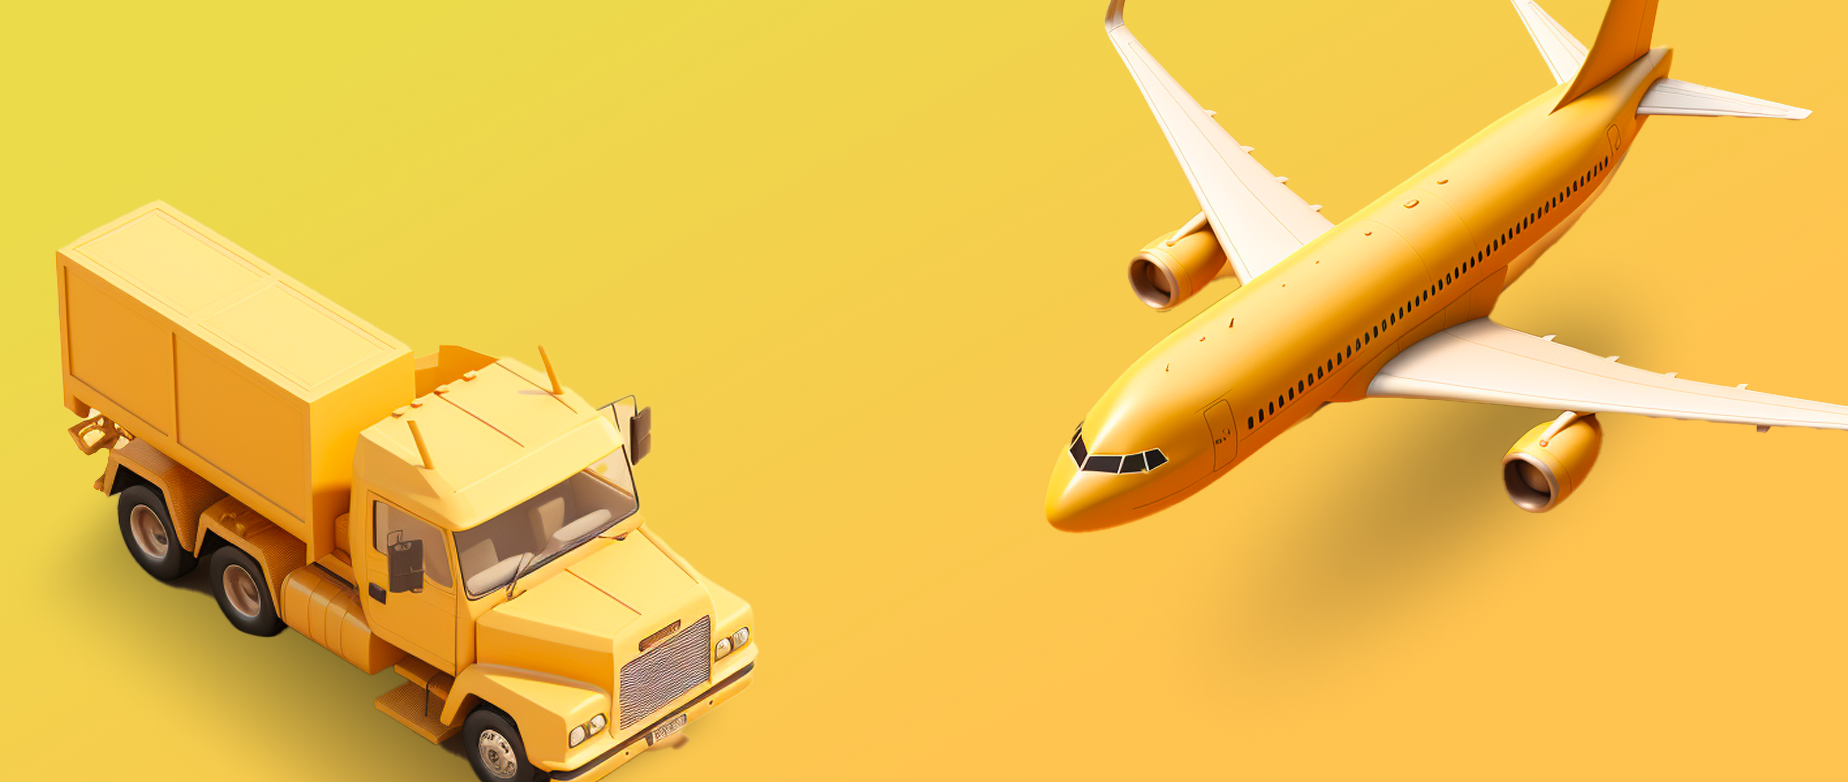 A yellow truck and a yellow plane on a yellow background.